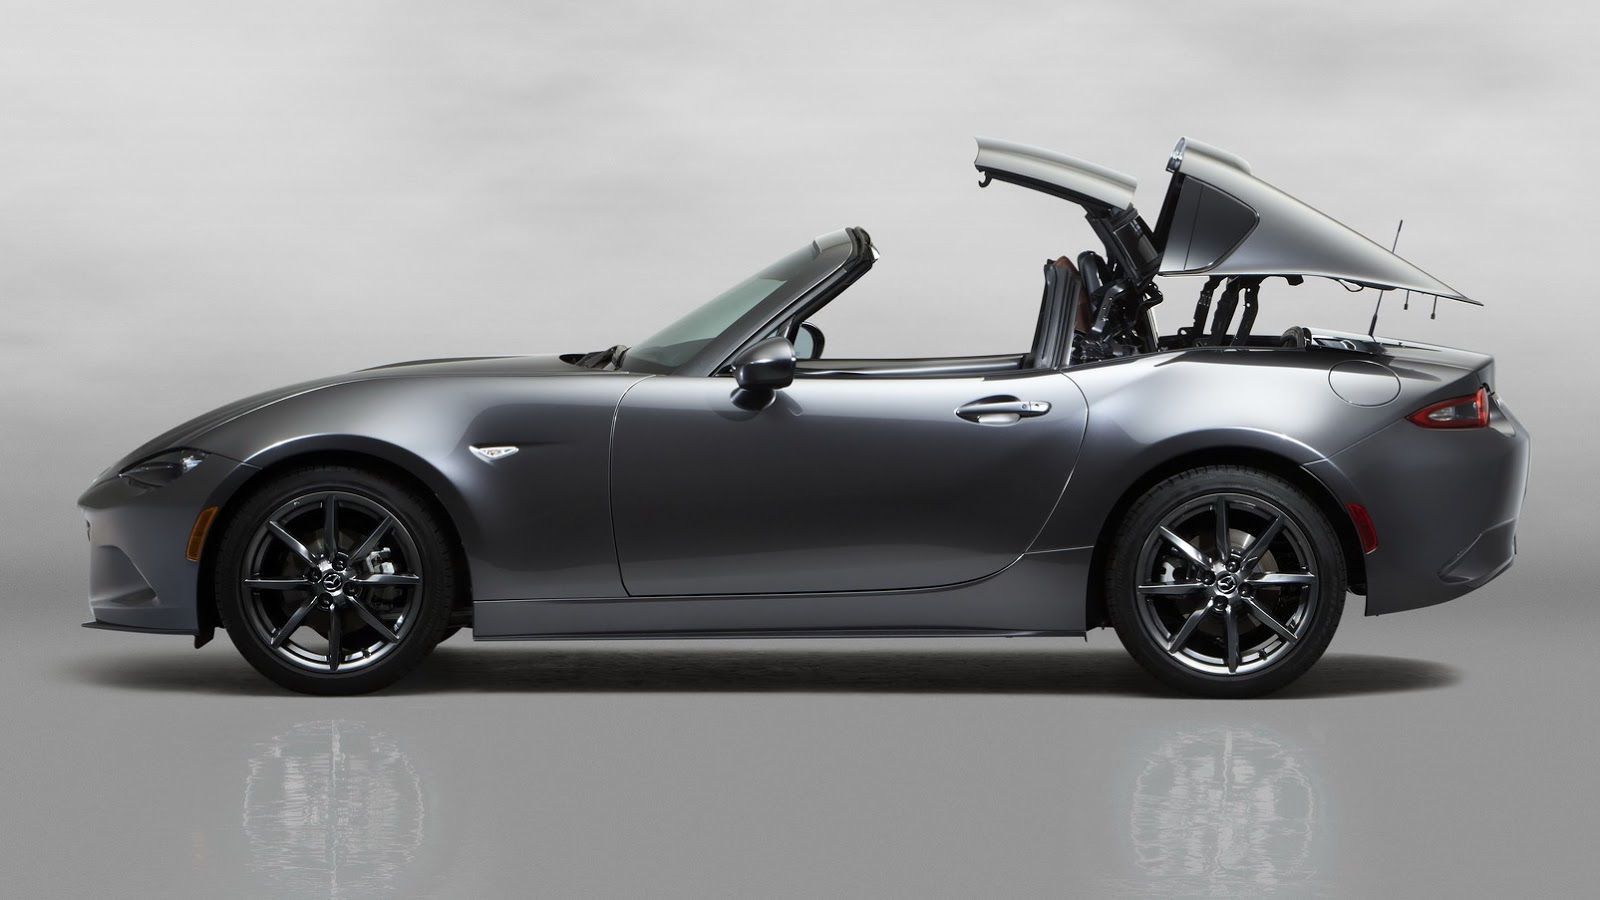 Mazda MX-5 Backgrounds, Compatible - PC, Mobile, Gadgets| 1600x900 px